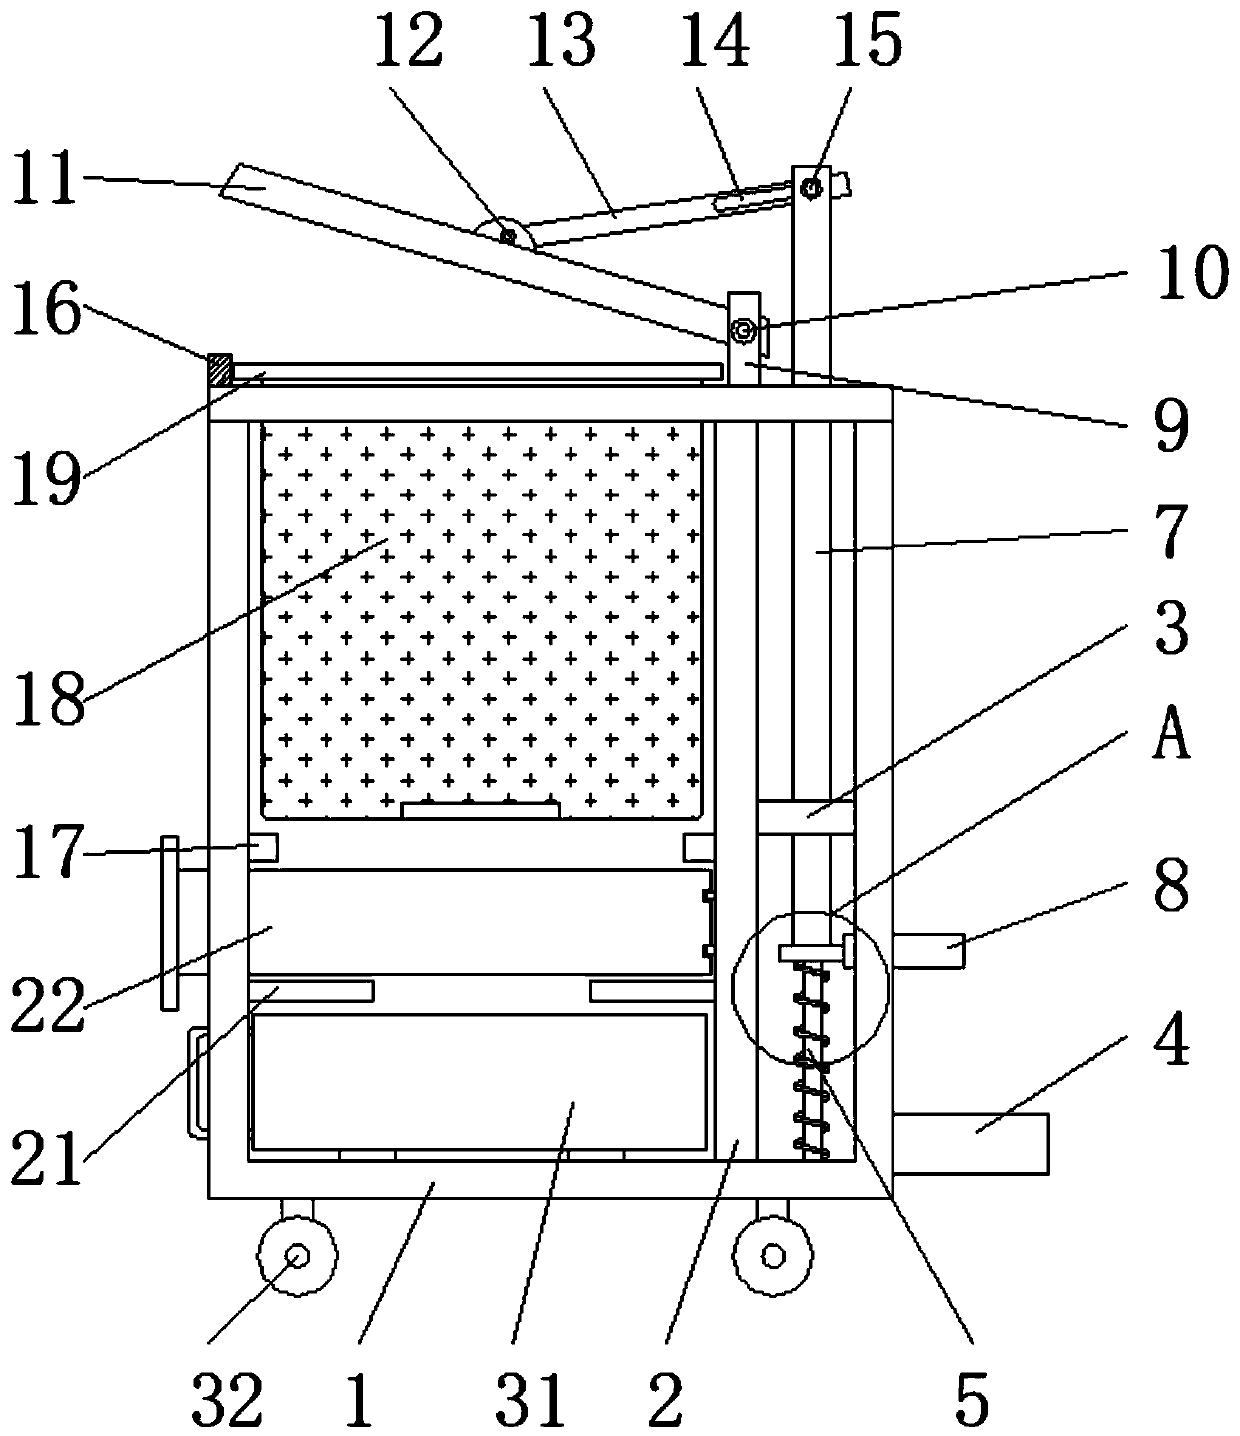 Garbage collecting and putting device for municipal construction